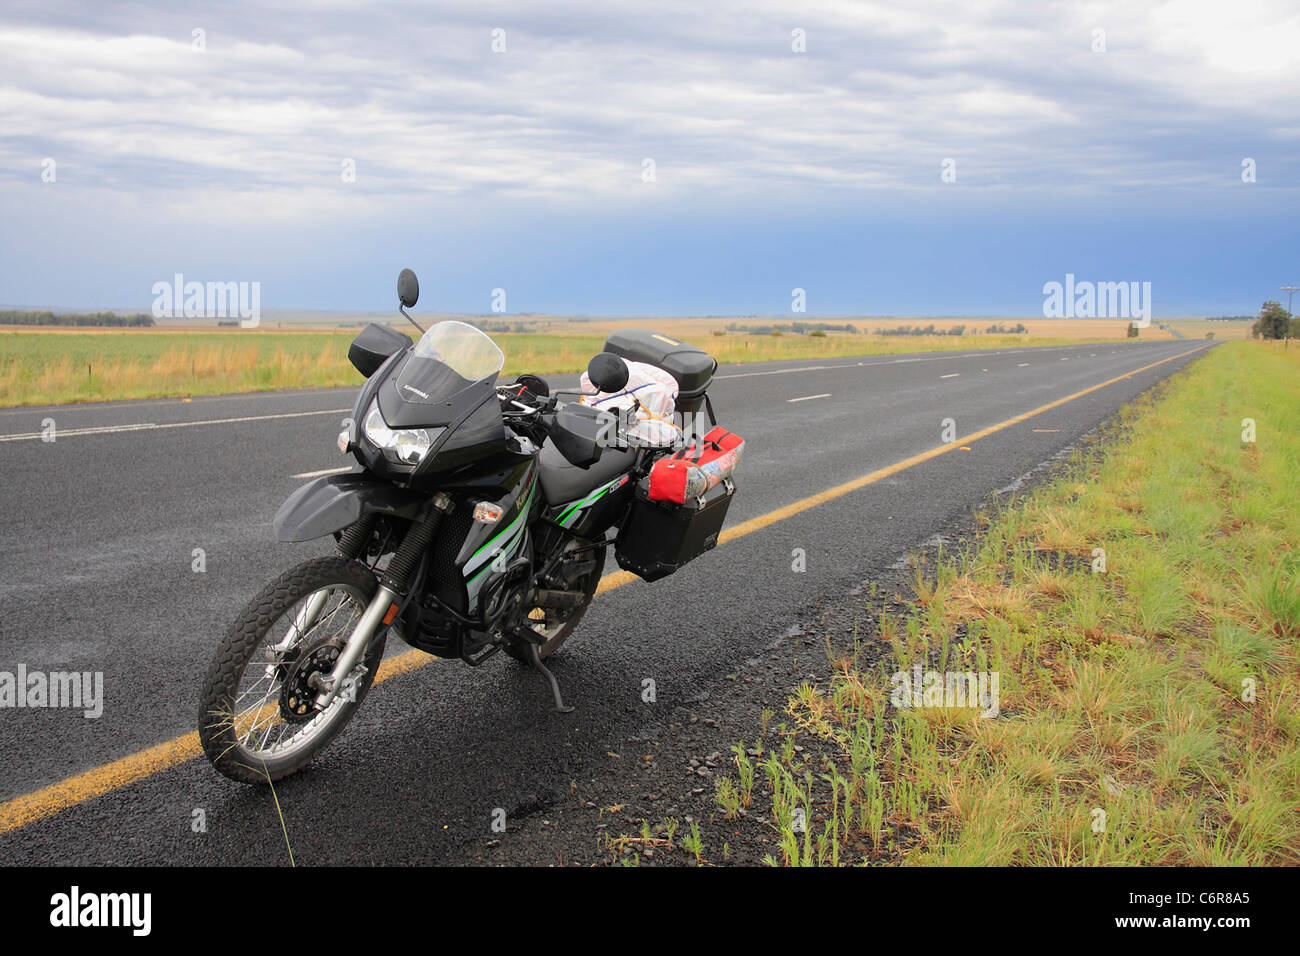 Tar road in remote landscape with motorcycle Stock Photo